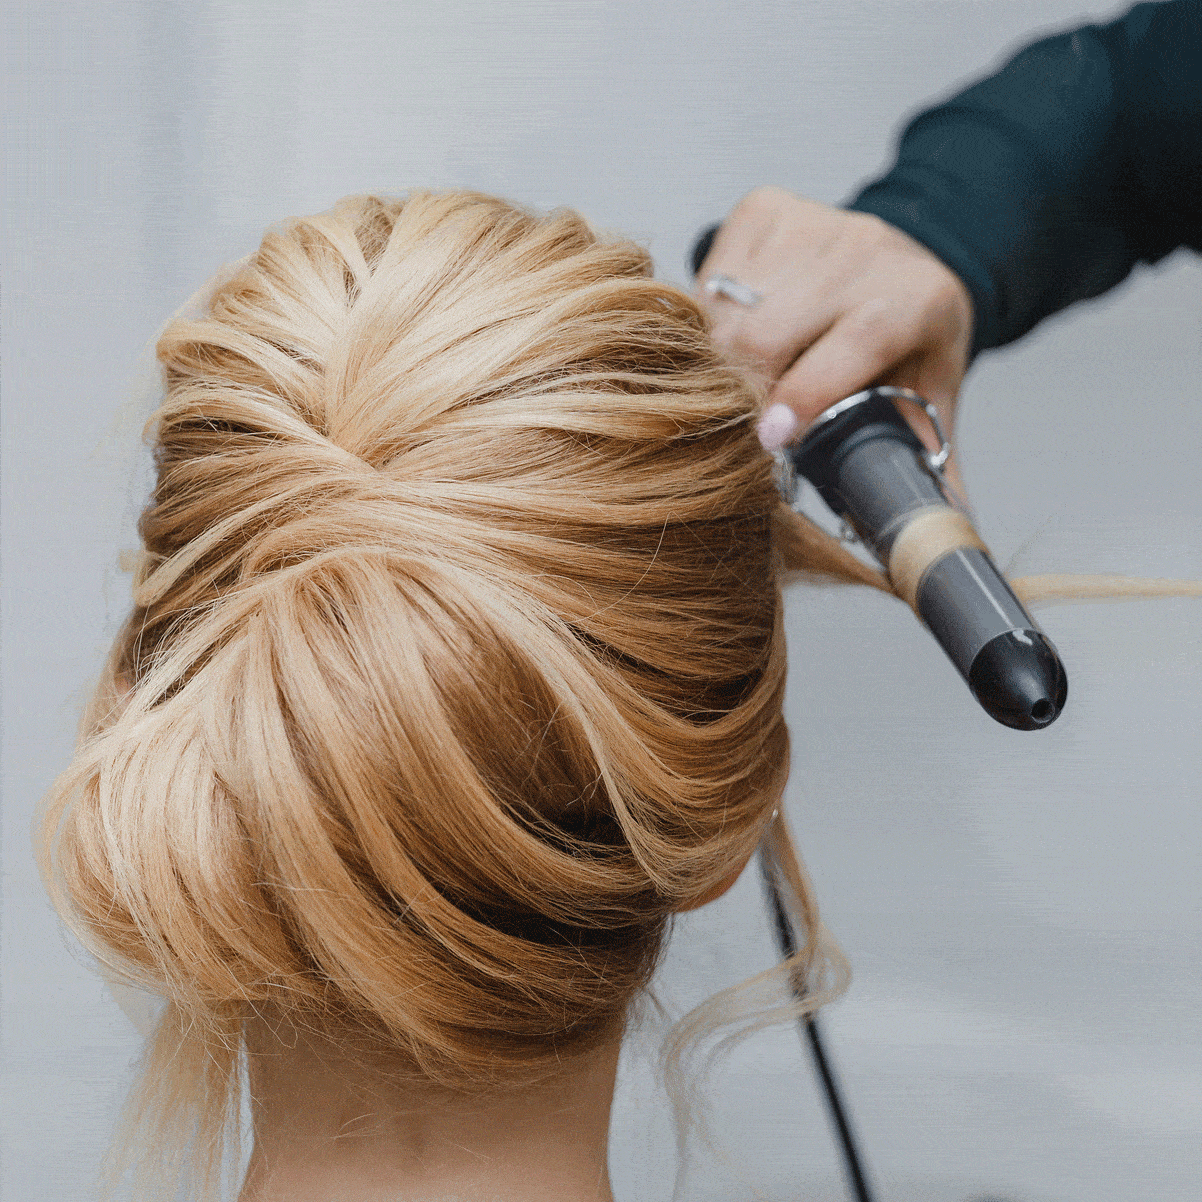 Hair Up Course Course - Open Study College